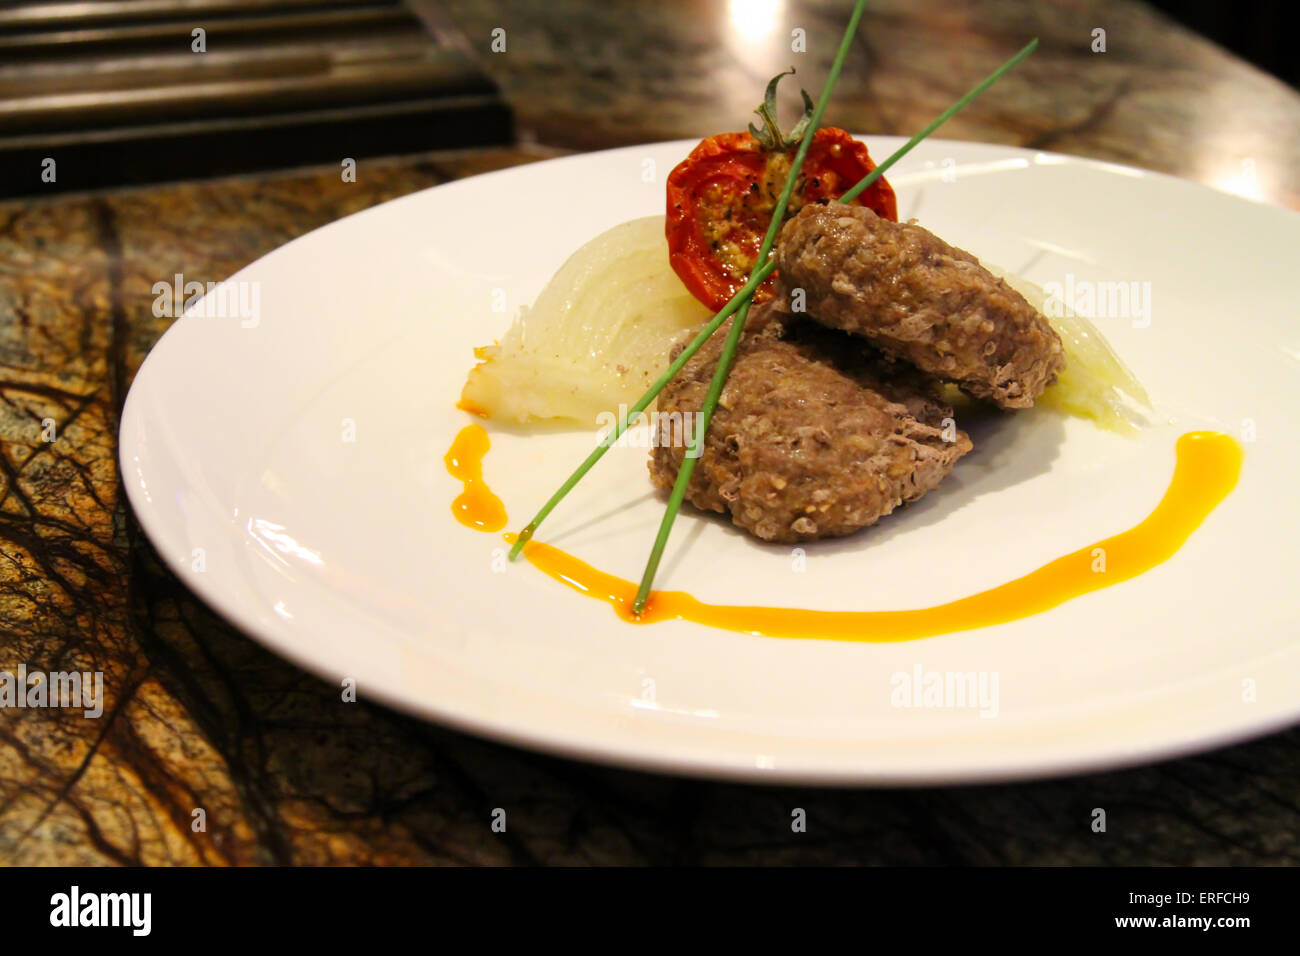 Delicious appetiser with some meat served in a white plate. Stock Photo